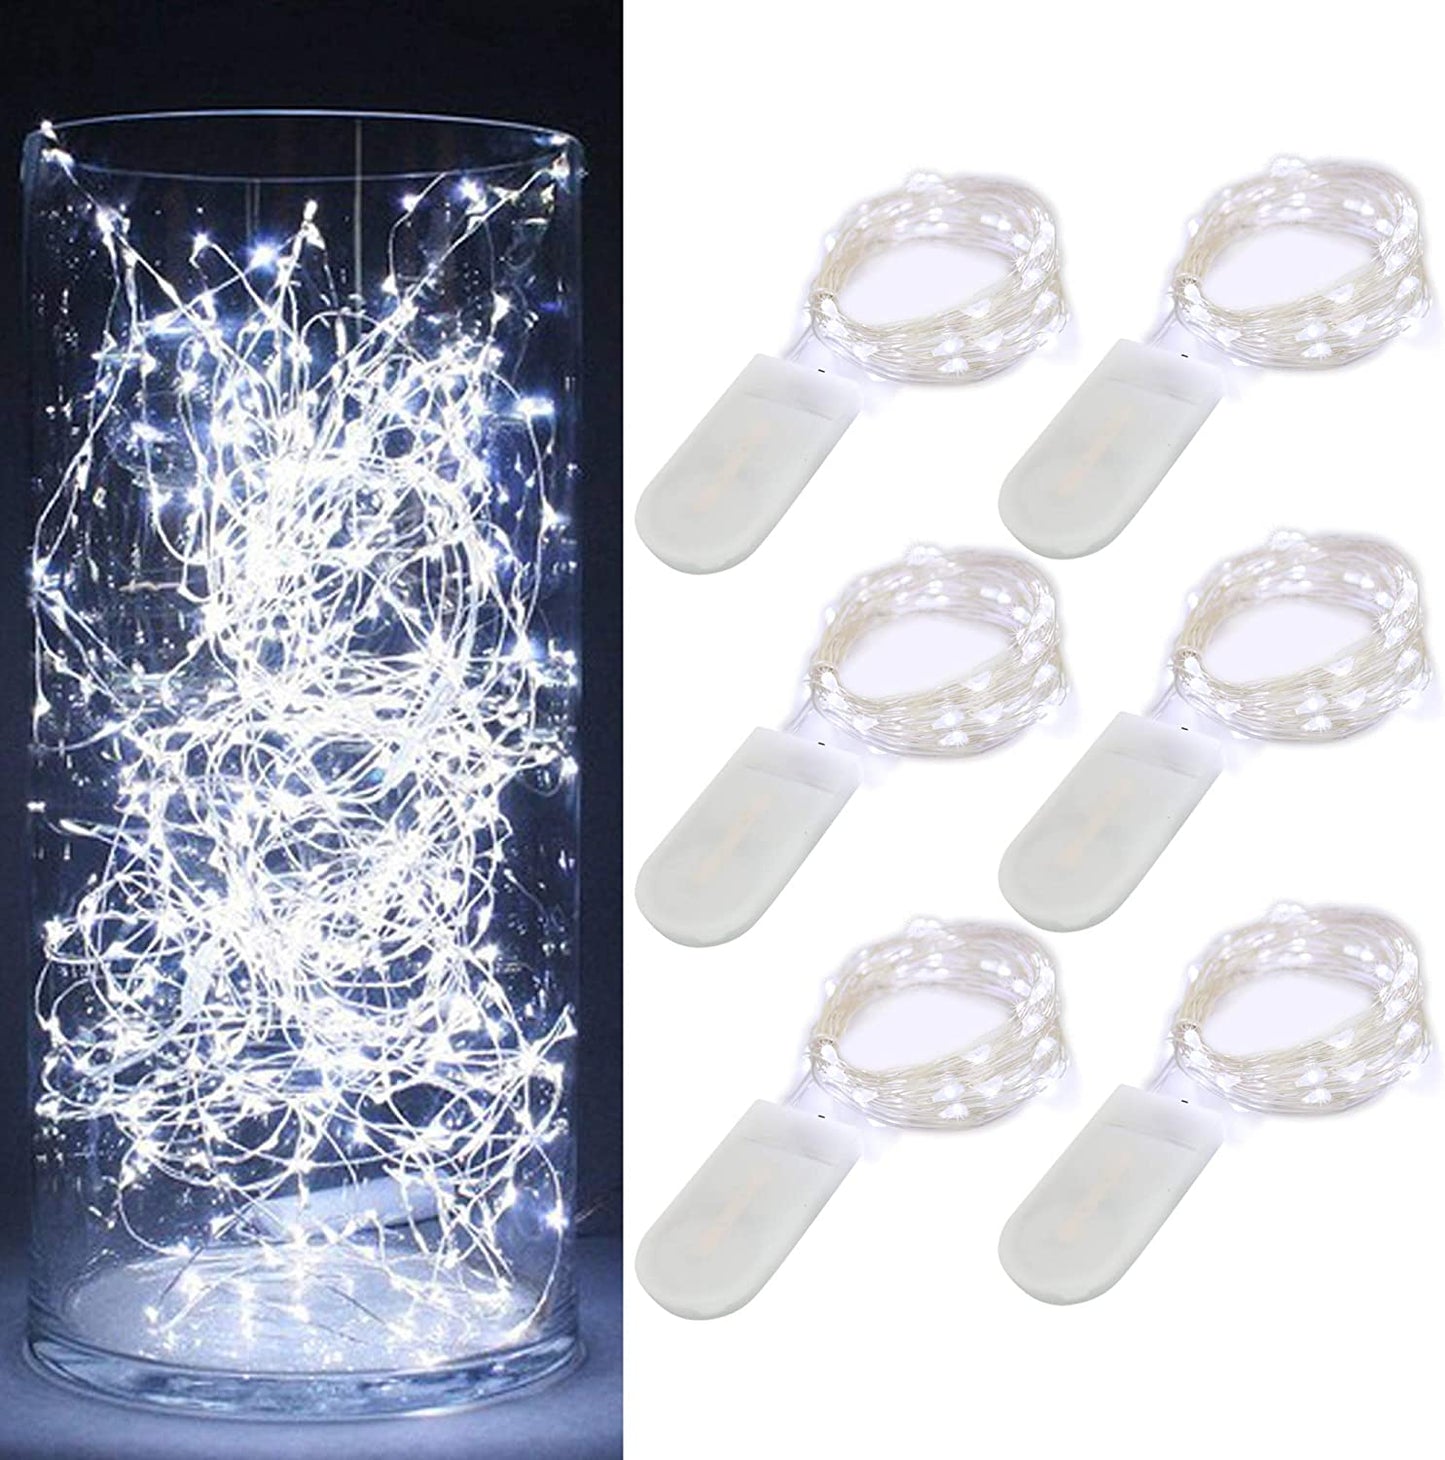 6 Pack Starry String Lights Waterproof Fairy String Lights 20 Micro Starry Leds on Silvery Copper Wire CR2032 Batteries Included for Wedding Centerpiece Party Christmas Table Decor Warm White